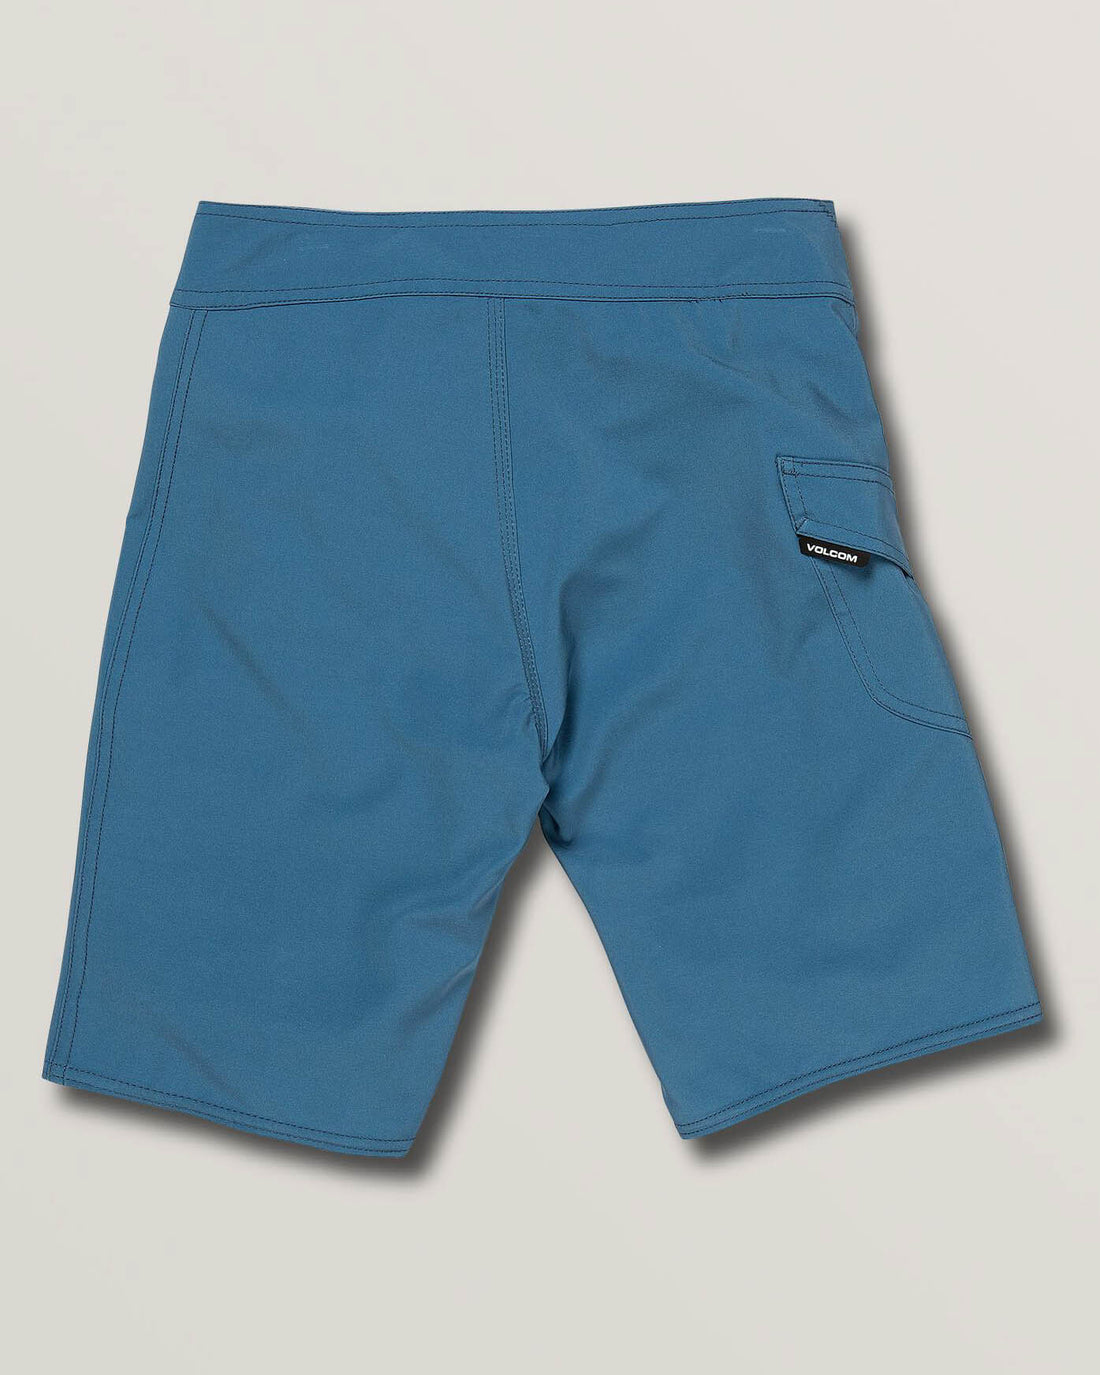 Boys Deadly Stones Mod Shorts - Airforce Blue